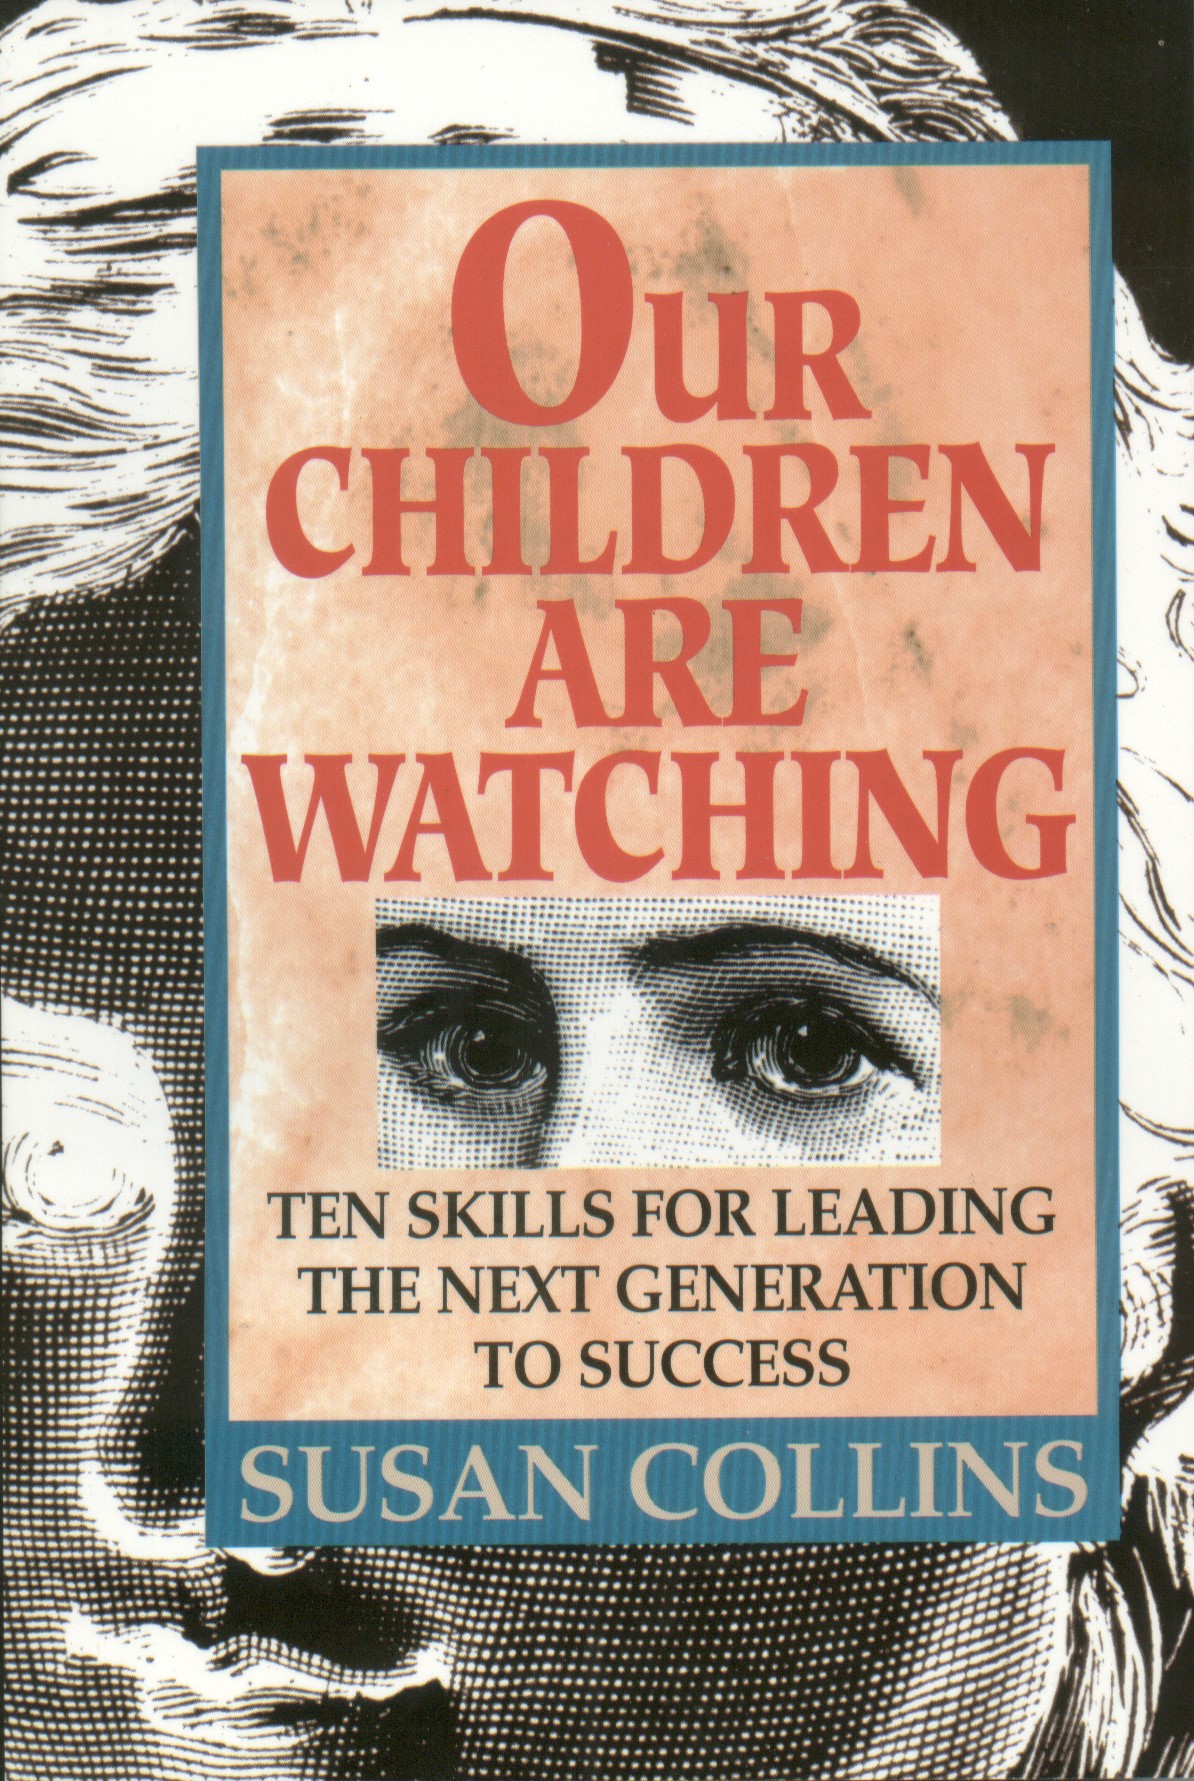 Copy of Our Children Are Watching